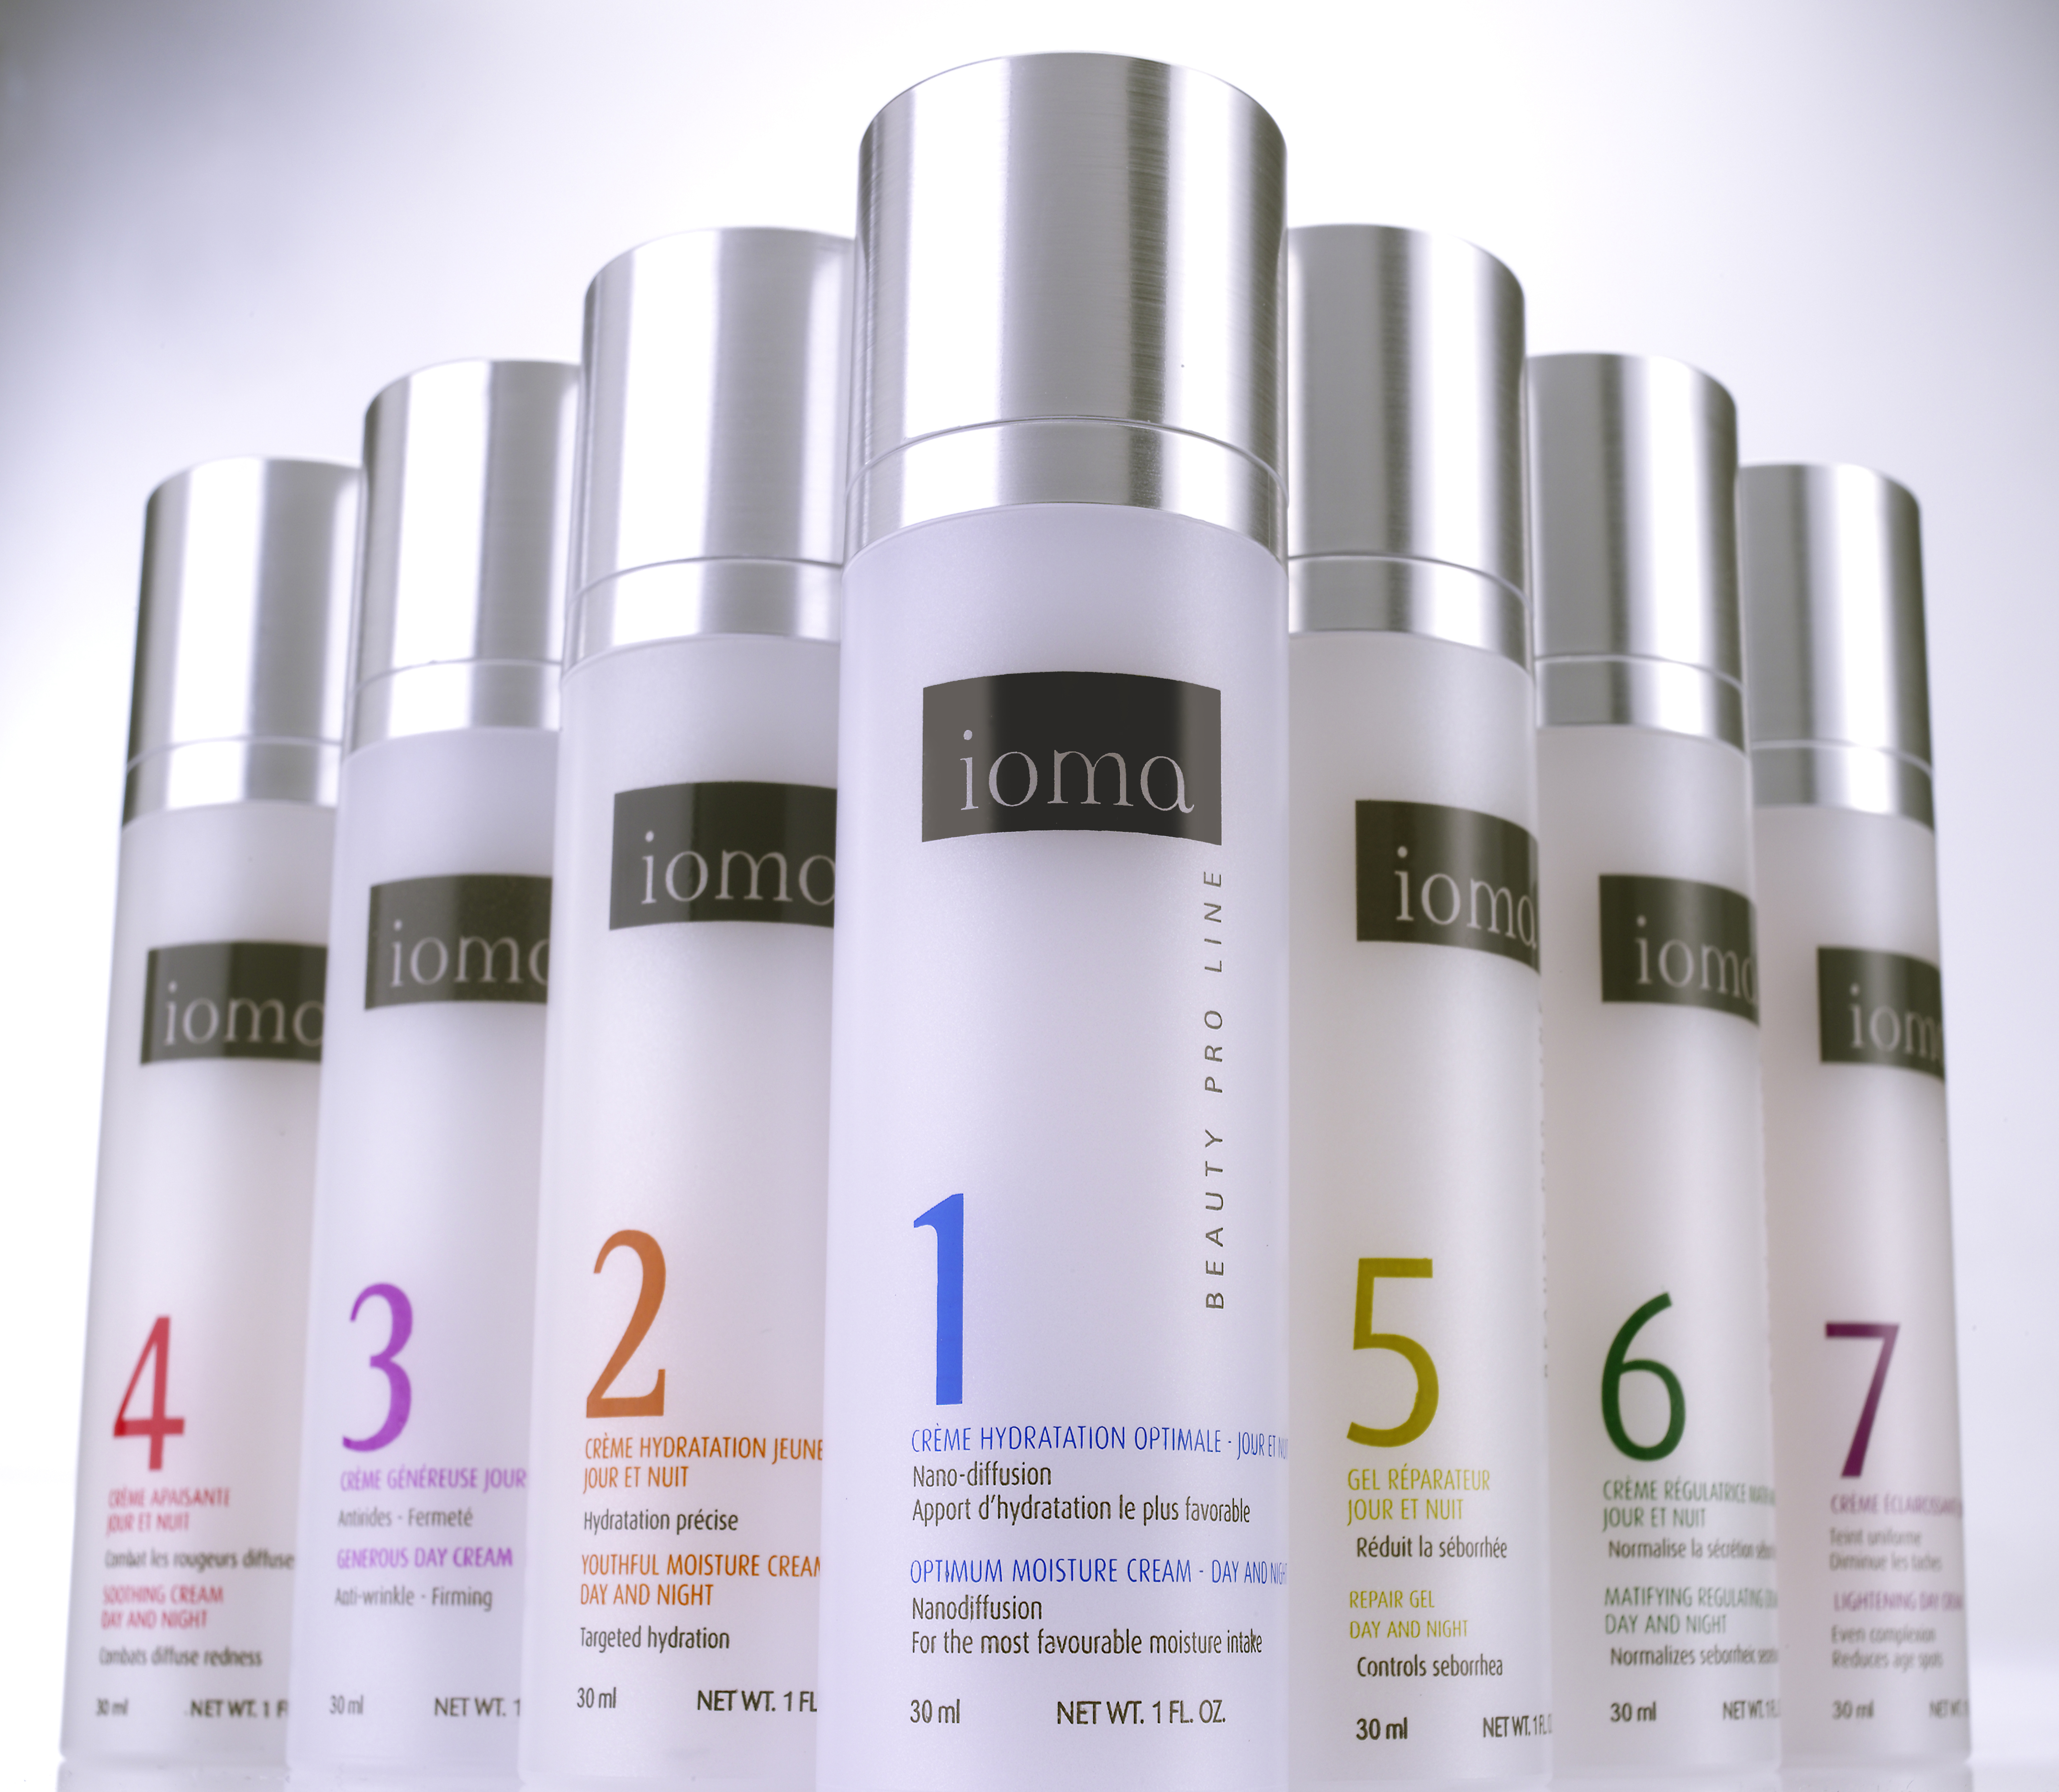 Customized Skincare that Corrects Individual Imperfections – IOMA Paris